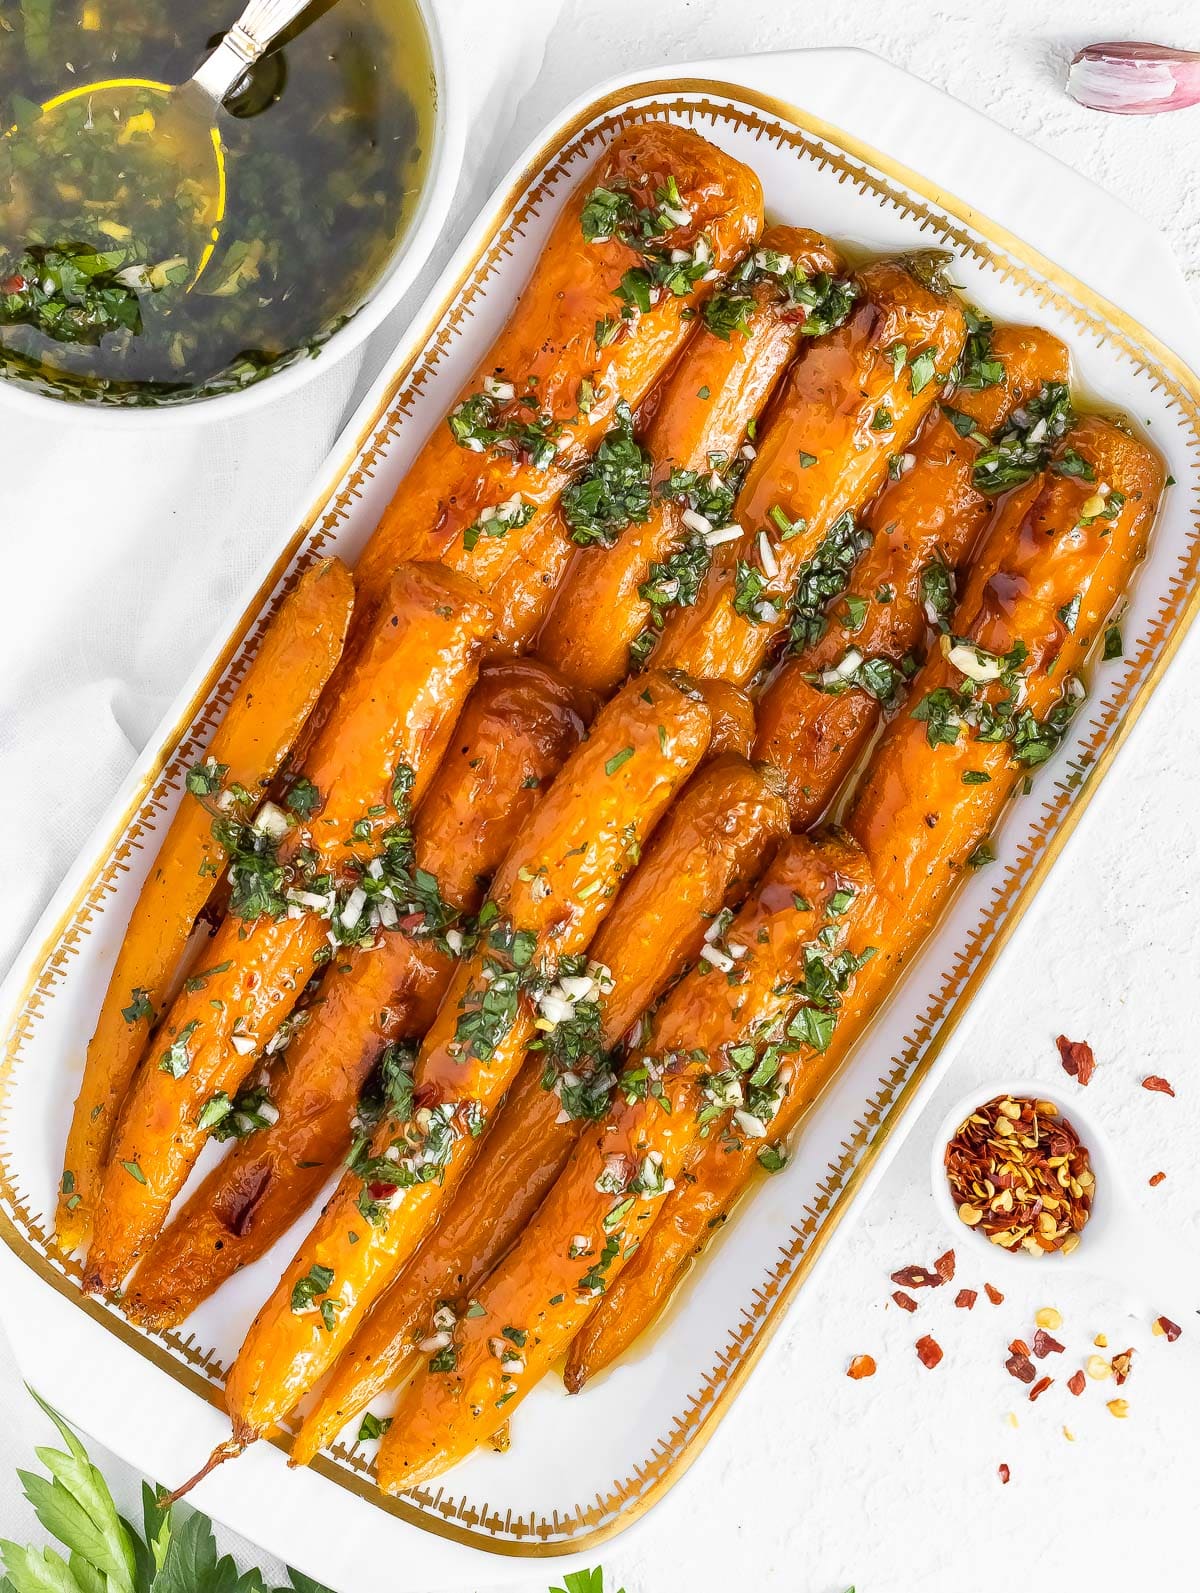 chimichurri on oven-roasted carrots